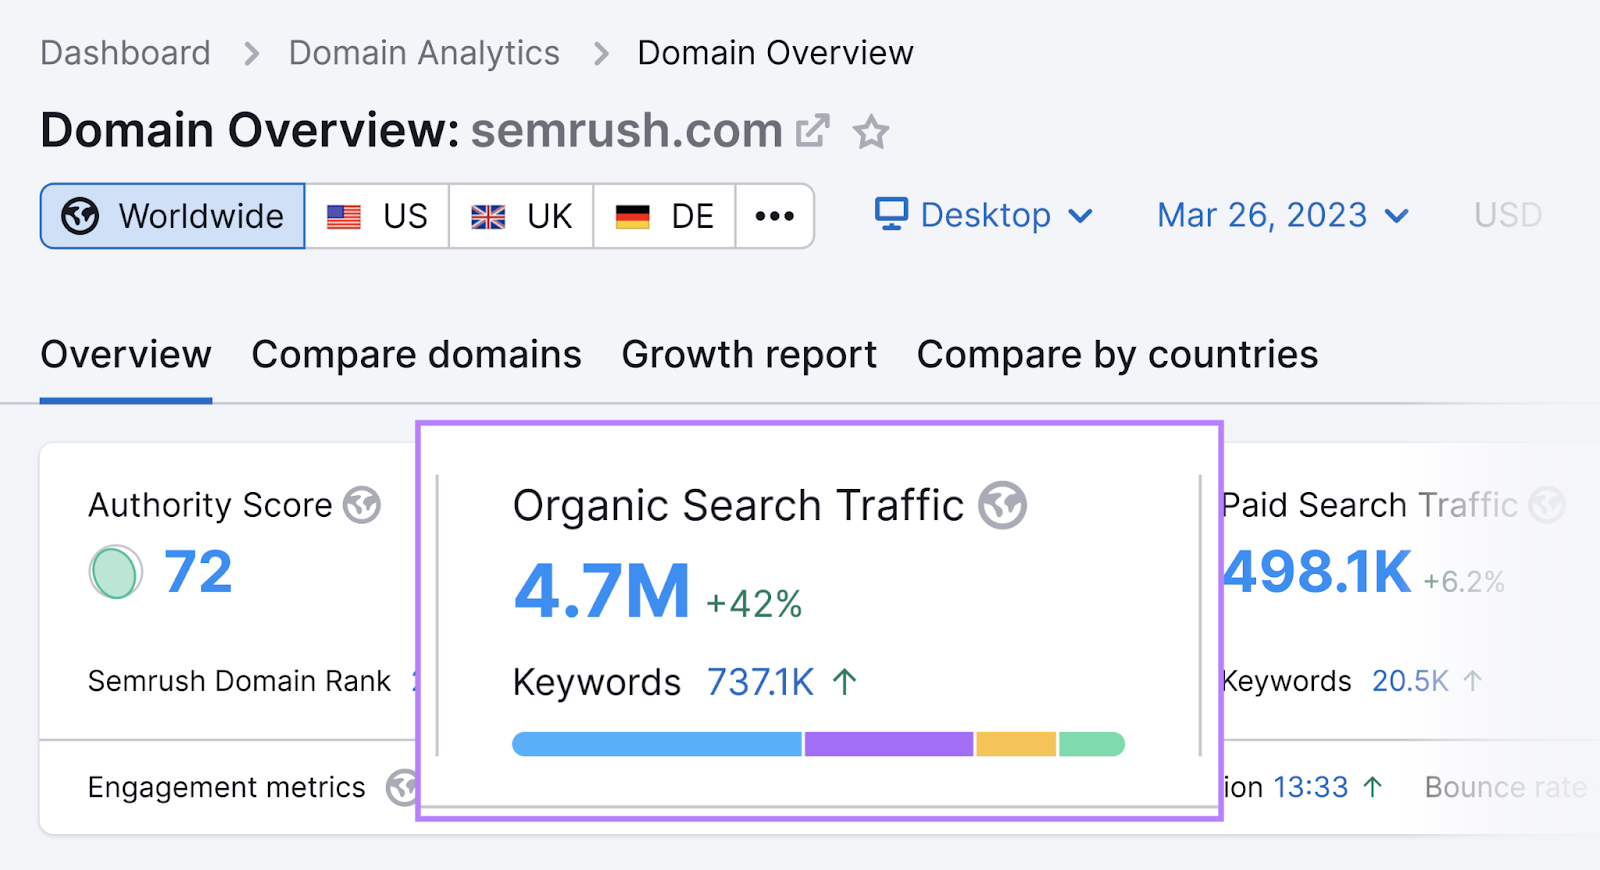 Domain Overview tool shows 4.7M in organic search traffic metric for semrush.com